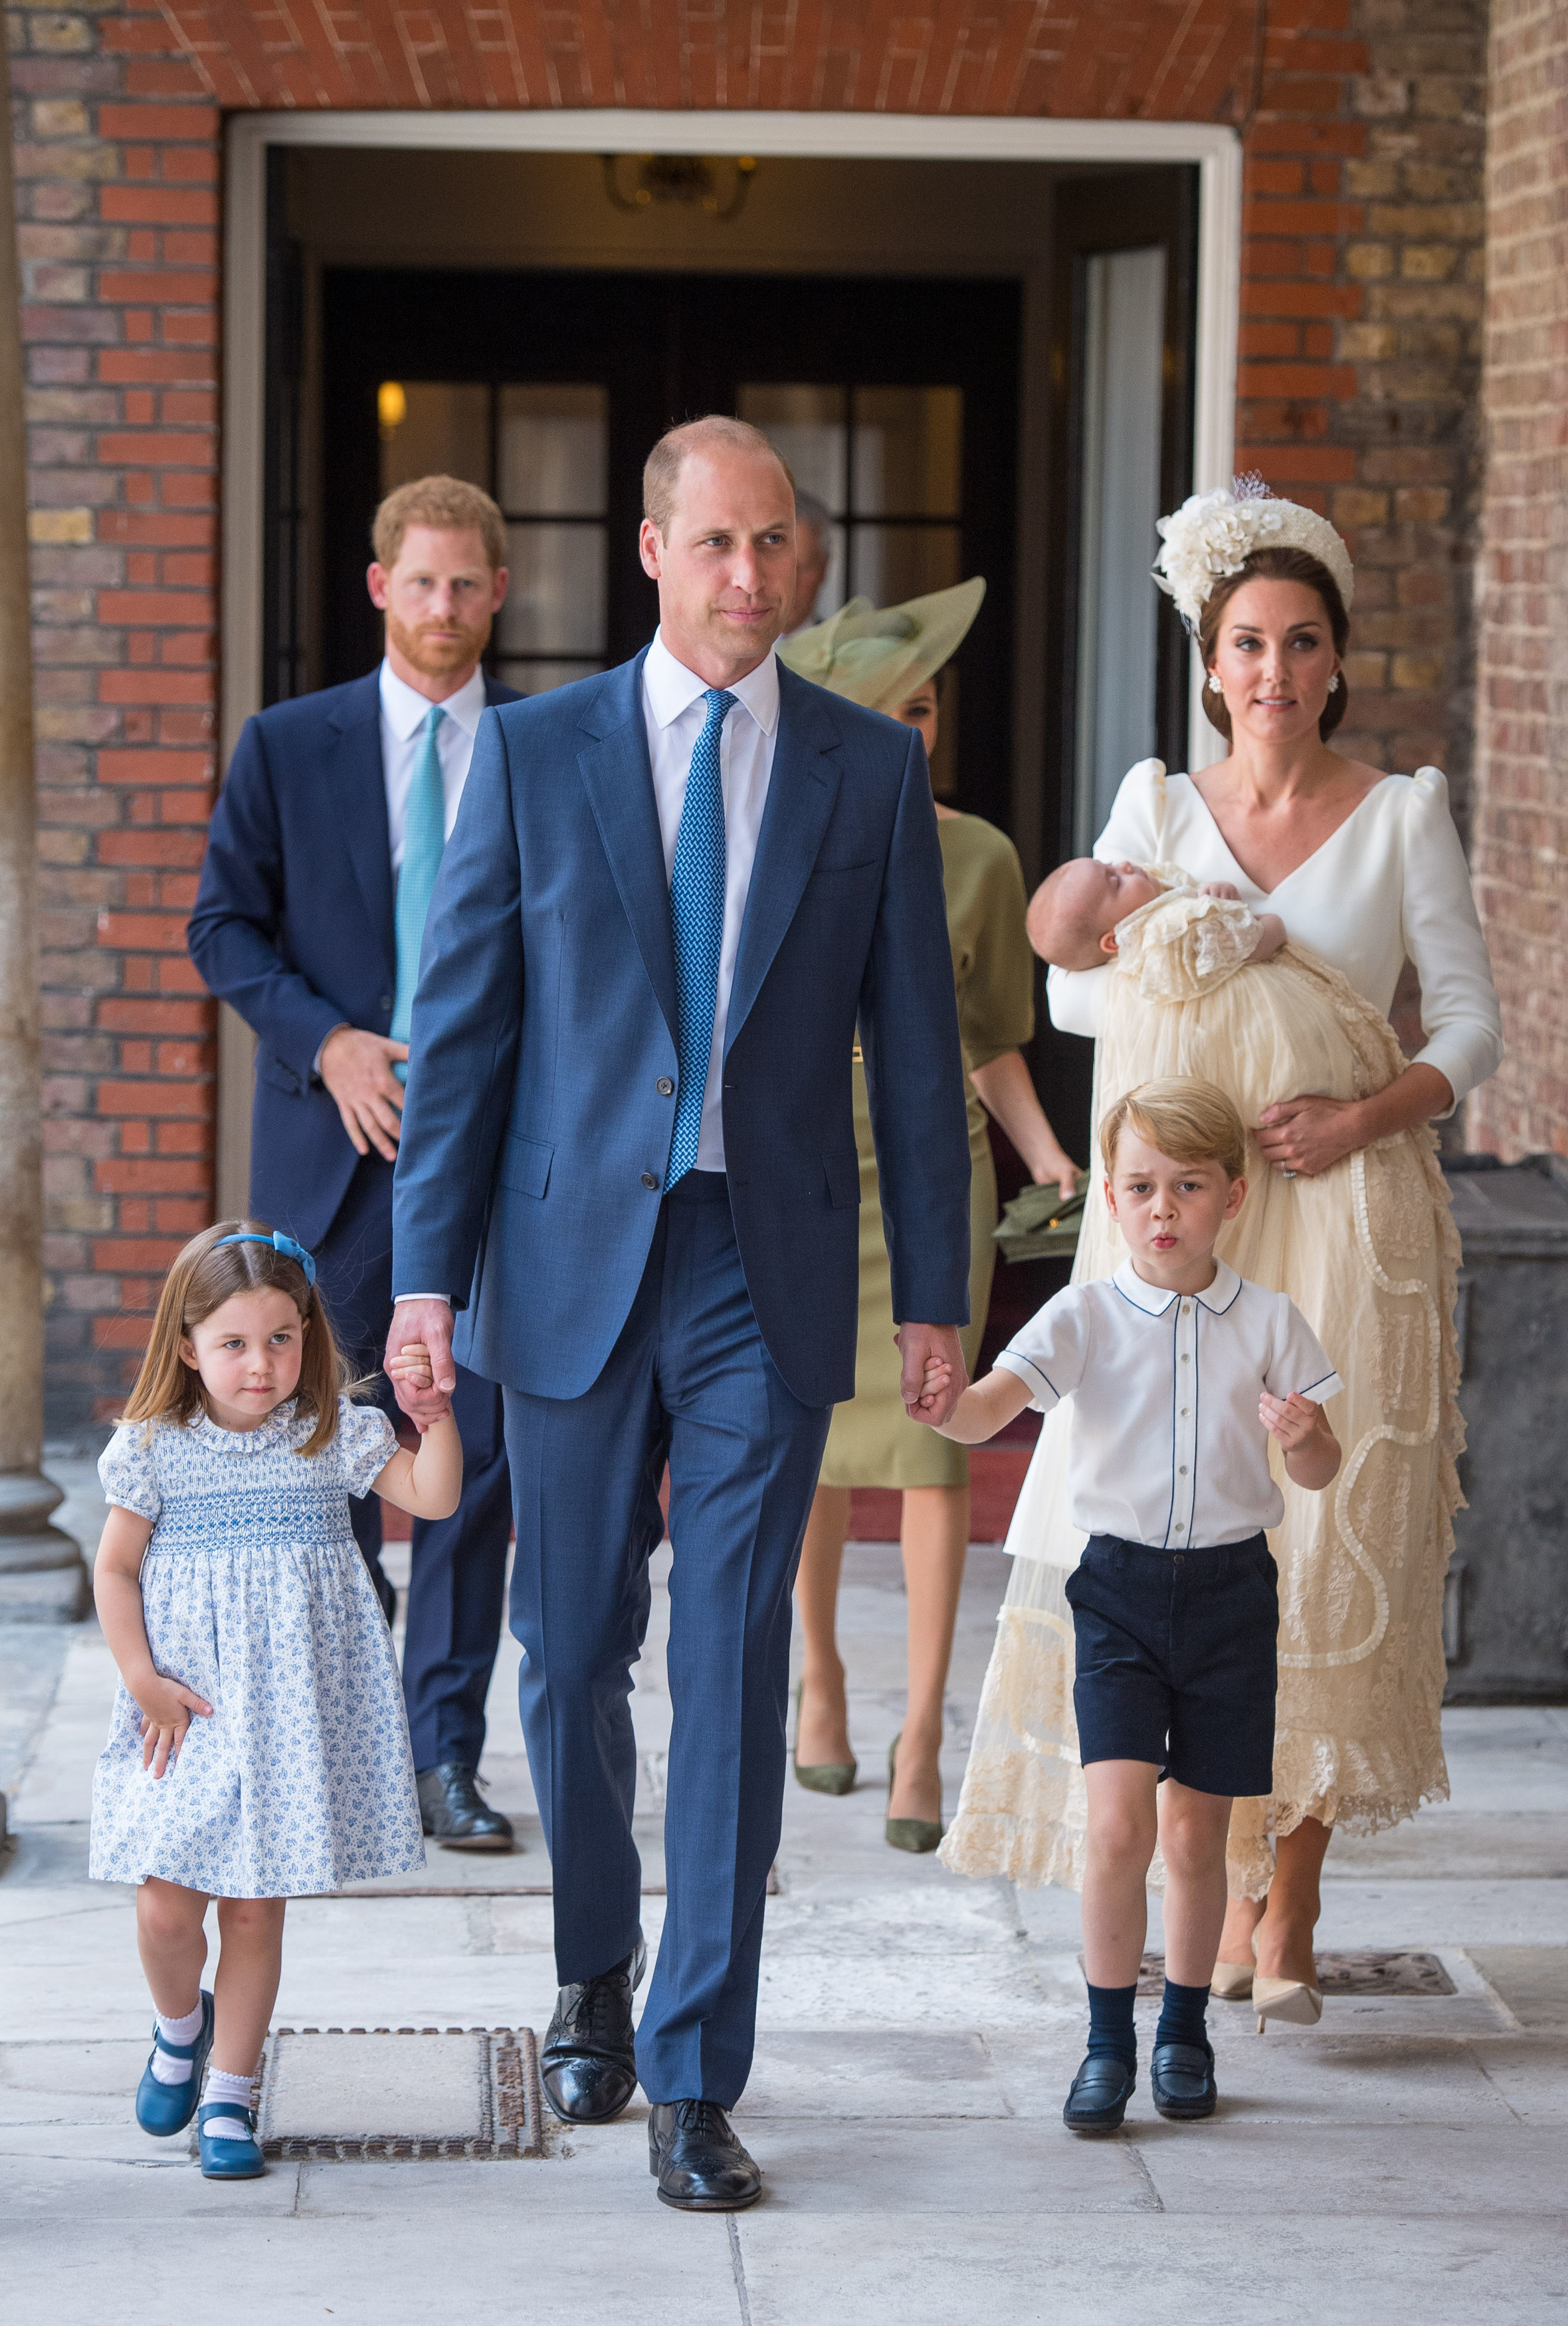 Princess Charlotte and Prince George hold the hands of their father, the Duke of Cambridge, as they arrive at the Chapel Royal, St James's Palace, London for the christening of their brother, Prince Louis, who is being carried by their mother, the Duchess of Cambridge